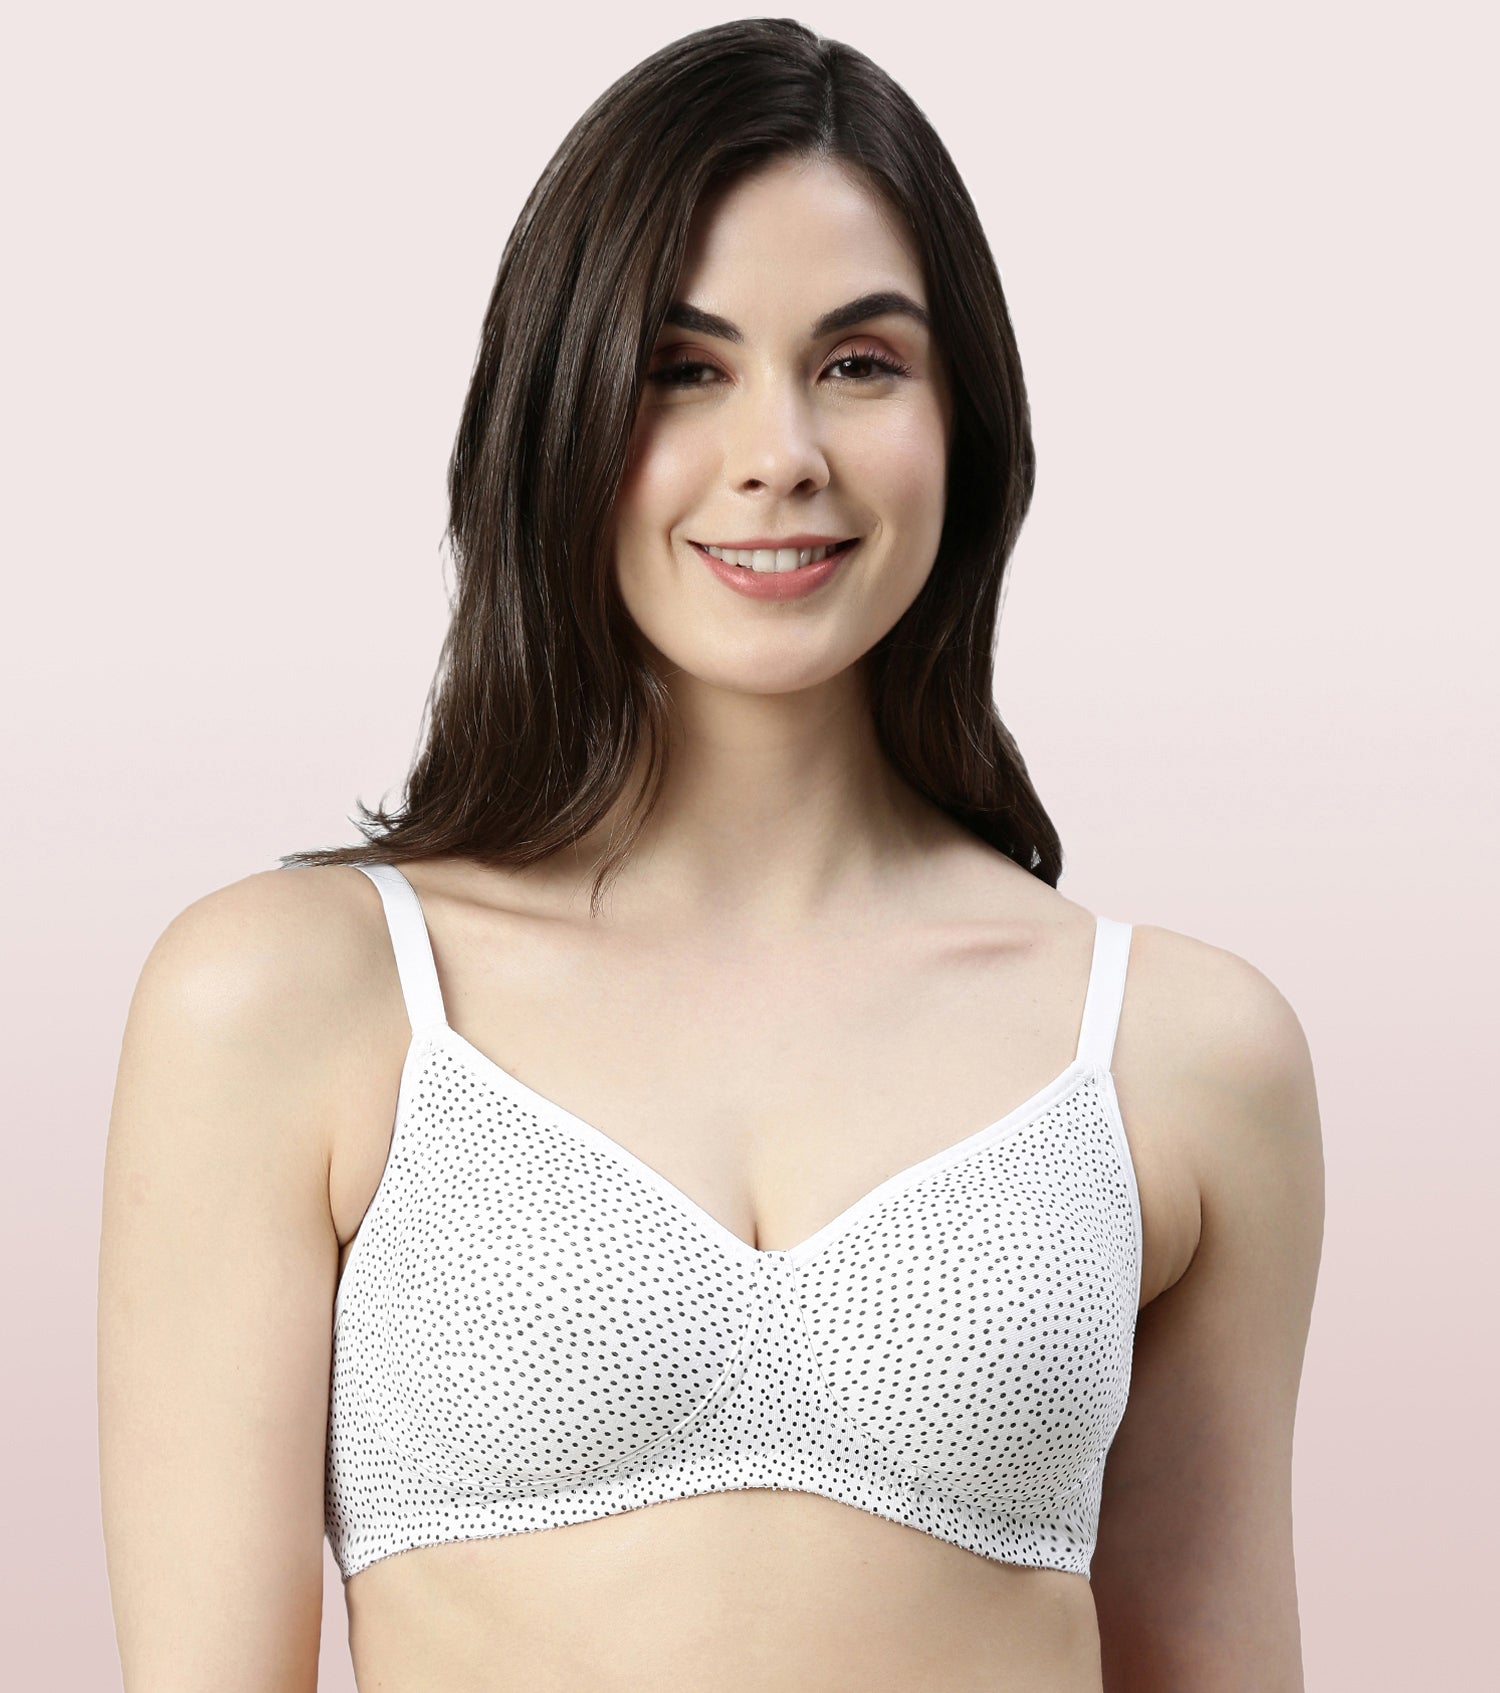 Enamor A042 Side Support�Shaper�Stretch�Cotton Everyday Bra -  Non-Padded,�Wire-Free�& High Coverage DEEP Ultramarine